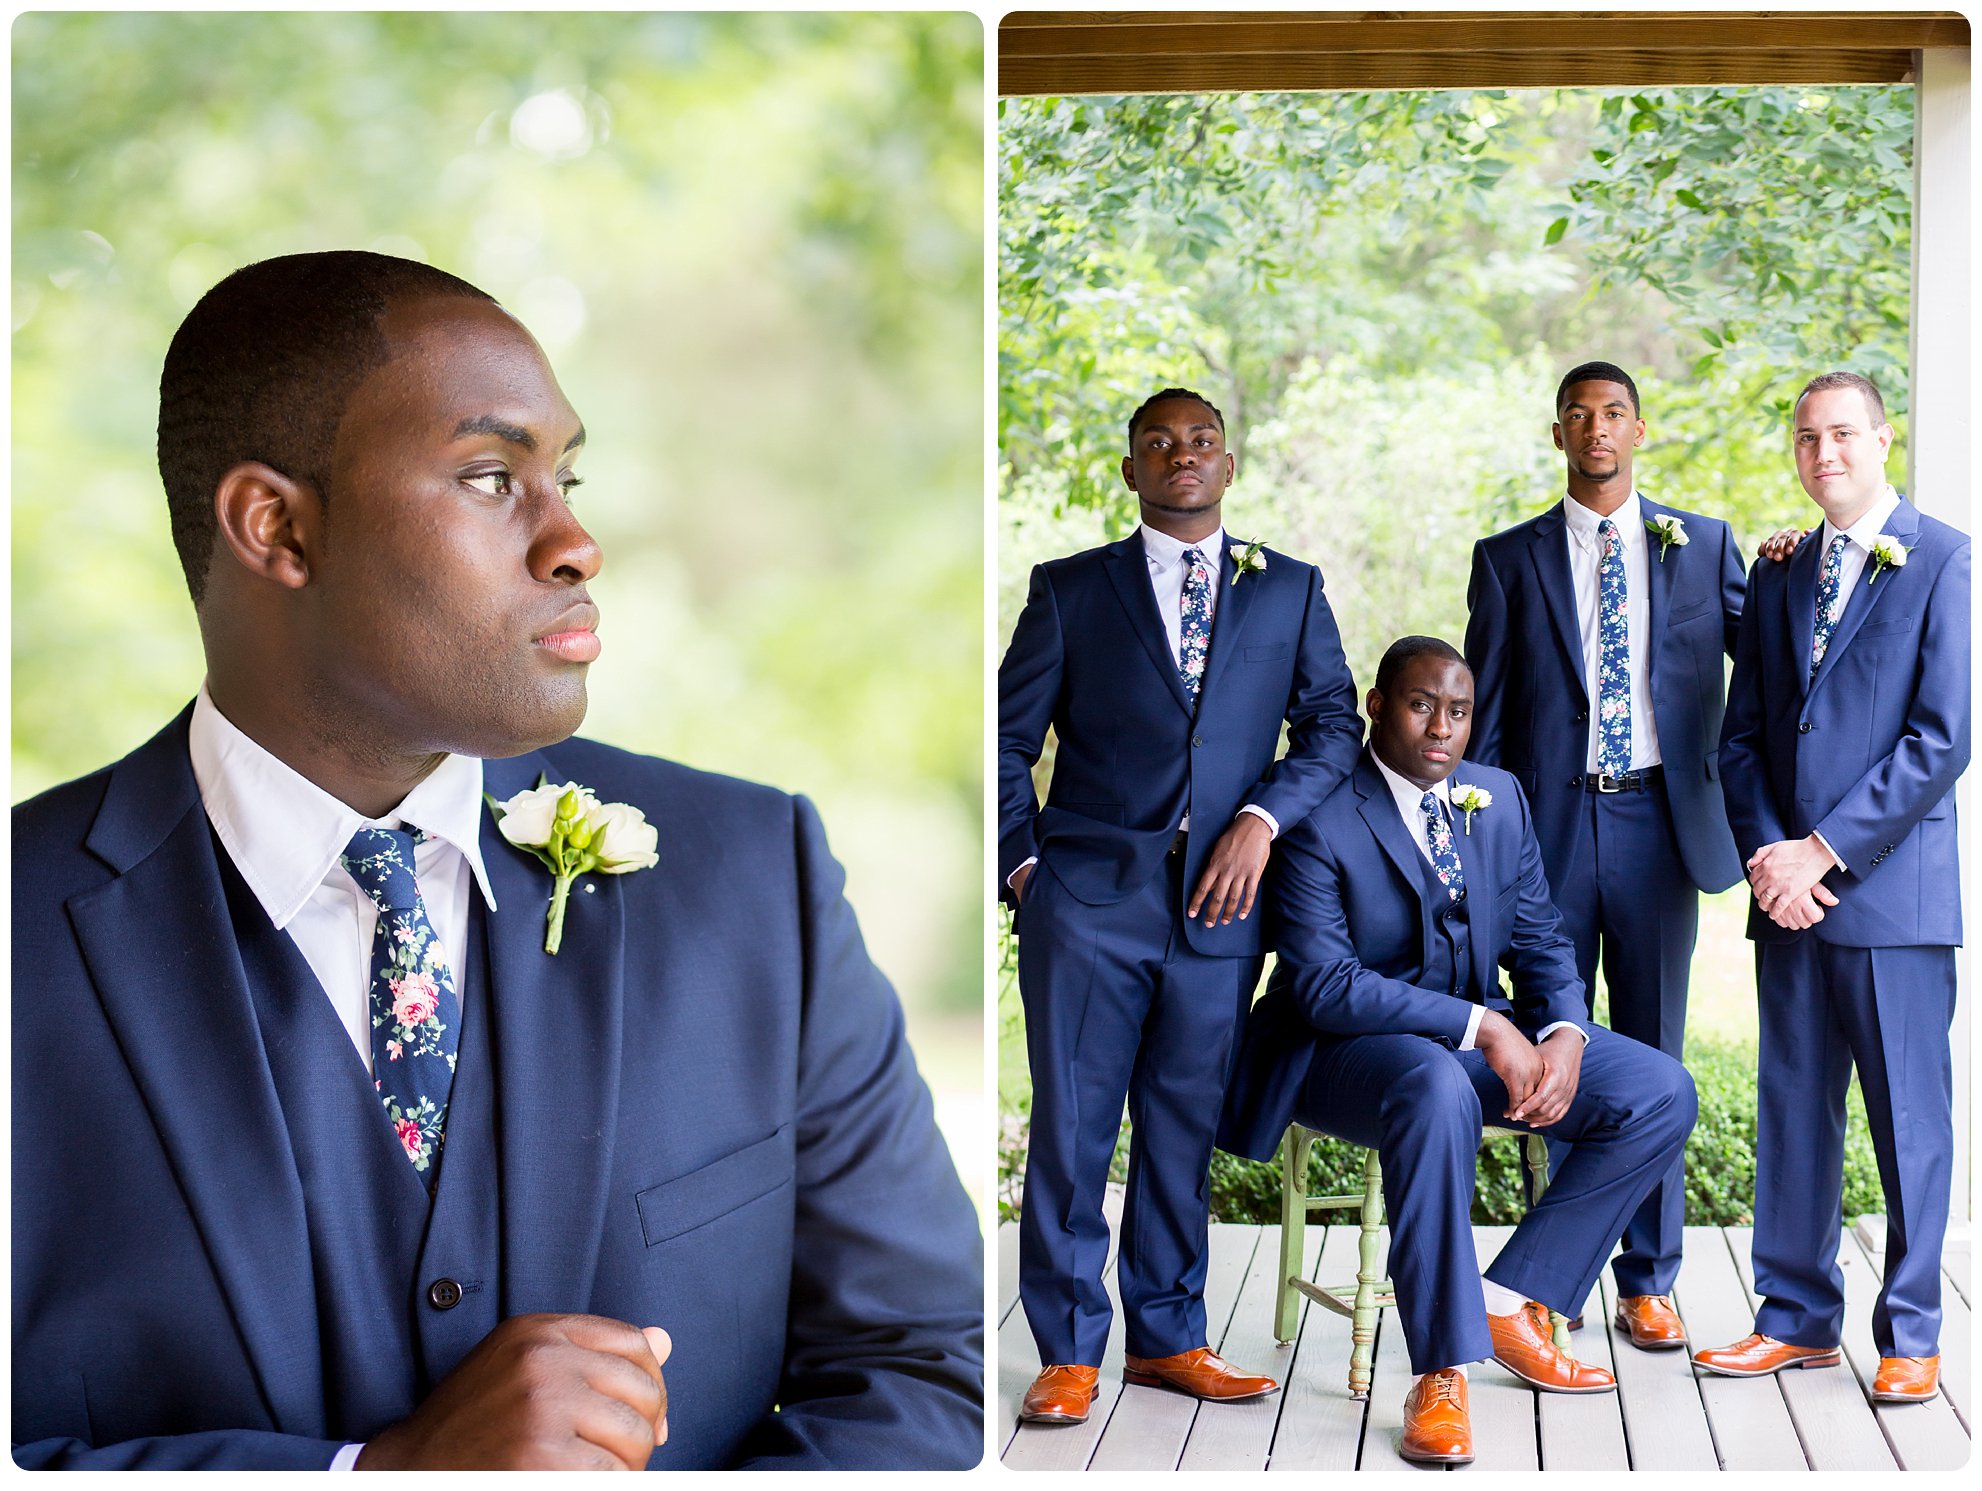 Nashville wedding at Iriswoods, Southern Belles and Blooms, navy tuxedo, whimsical garden wedding, southern wedding, southern bride, nashville bride, melanie grady photography, the best nashville wedding photographer, interracial couple wedding, mt juliet, southern groom